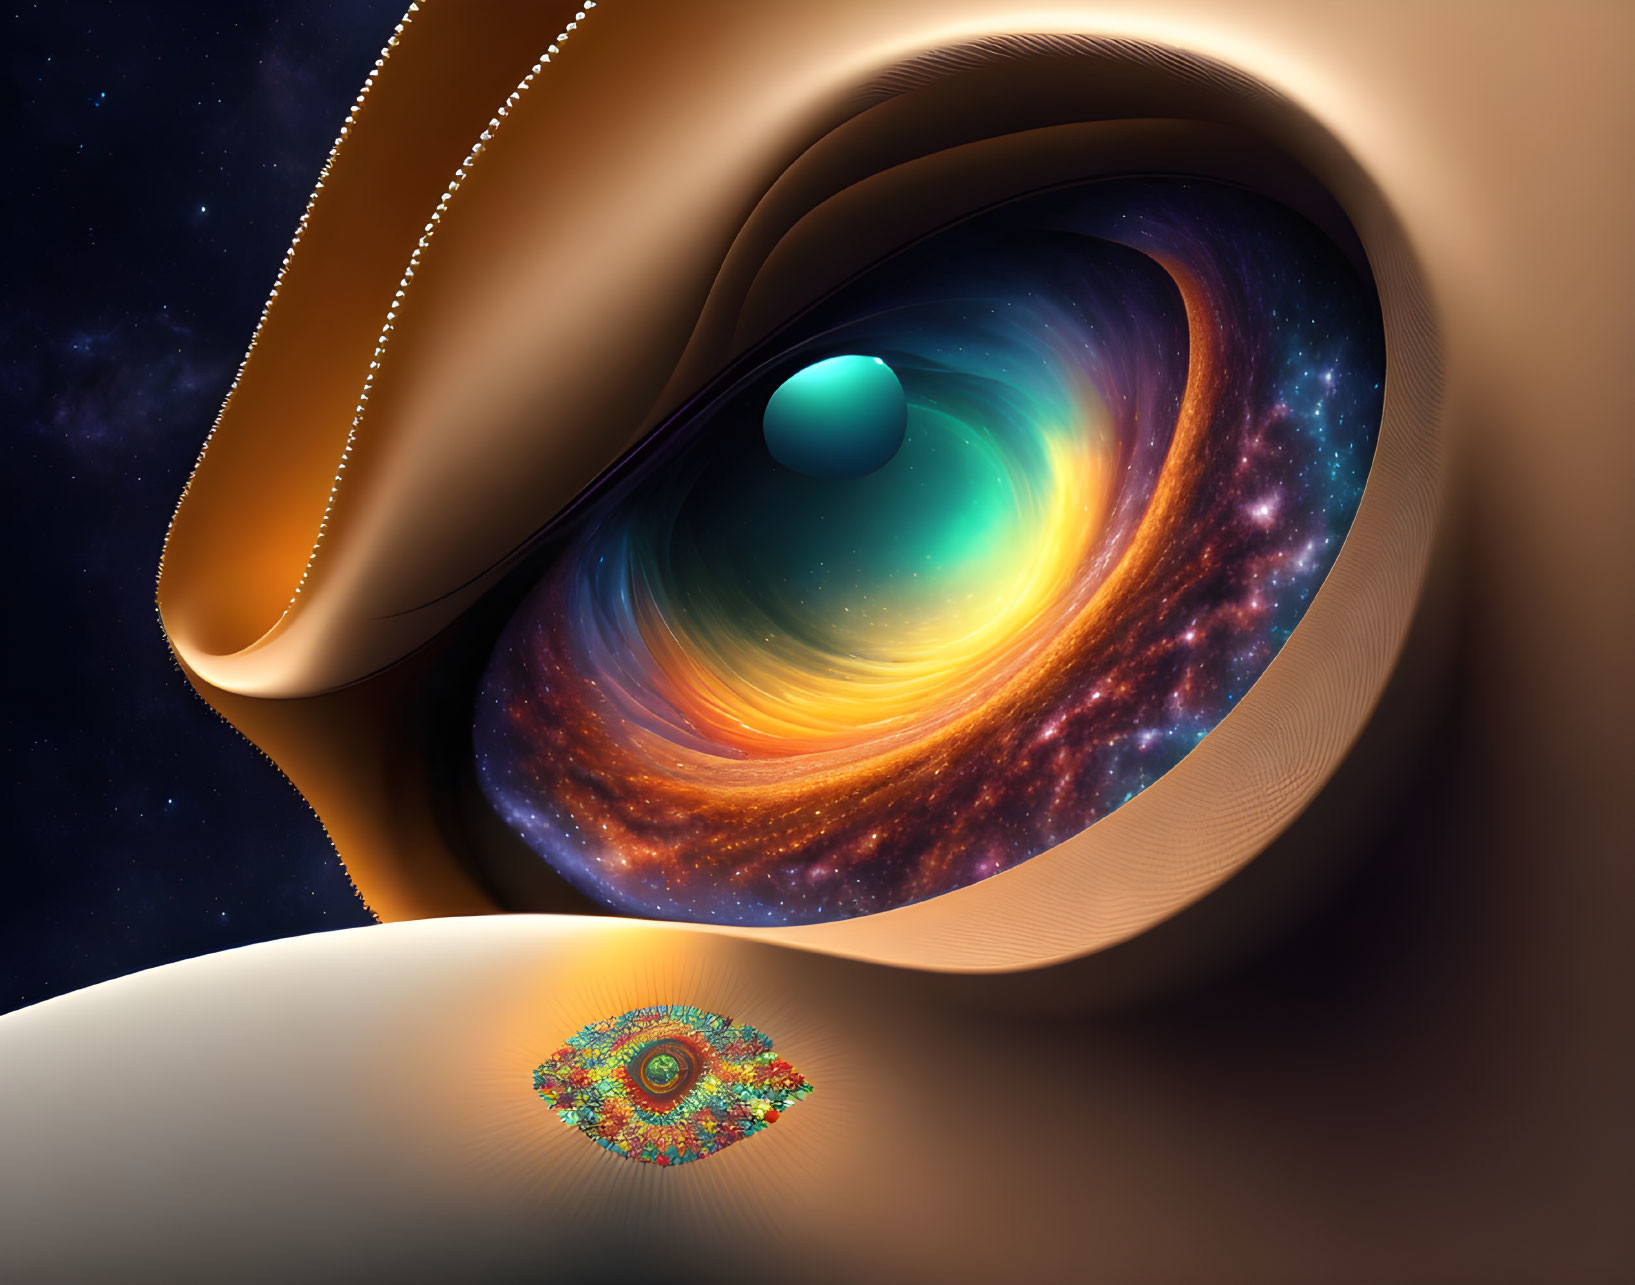 Colorful swirling galaxy in cosmic image with eye-like structures.